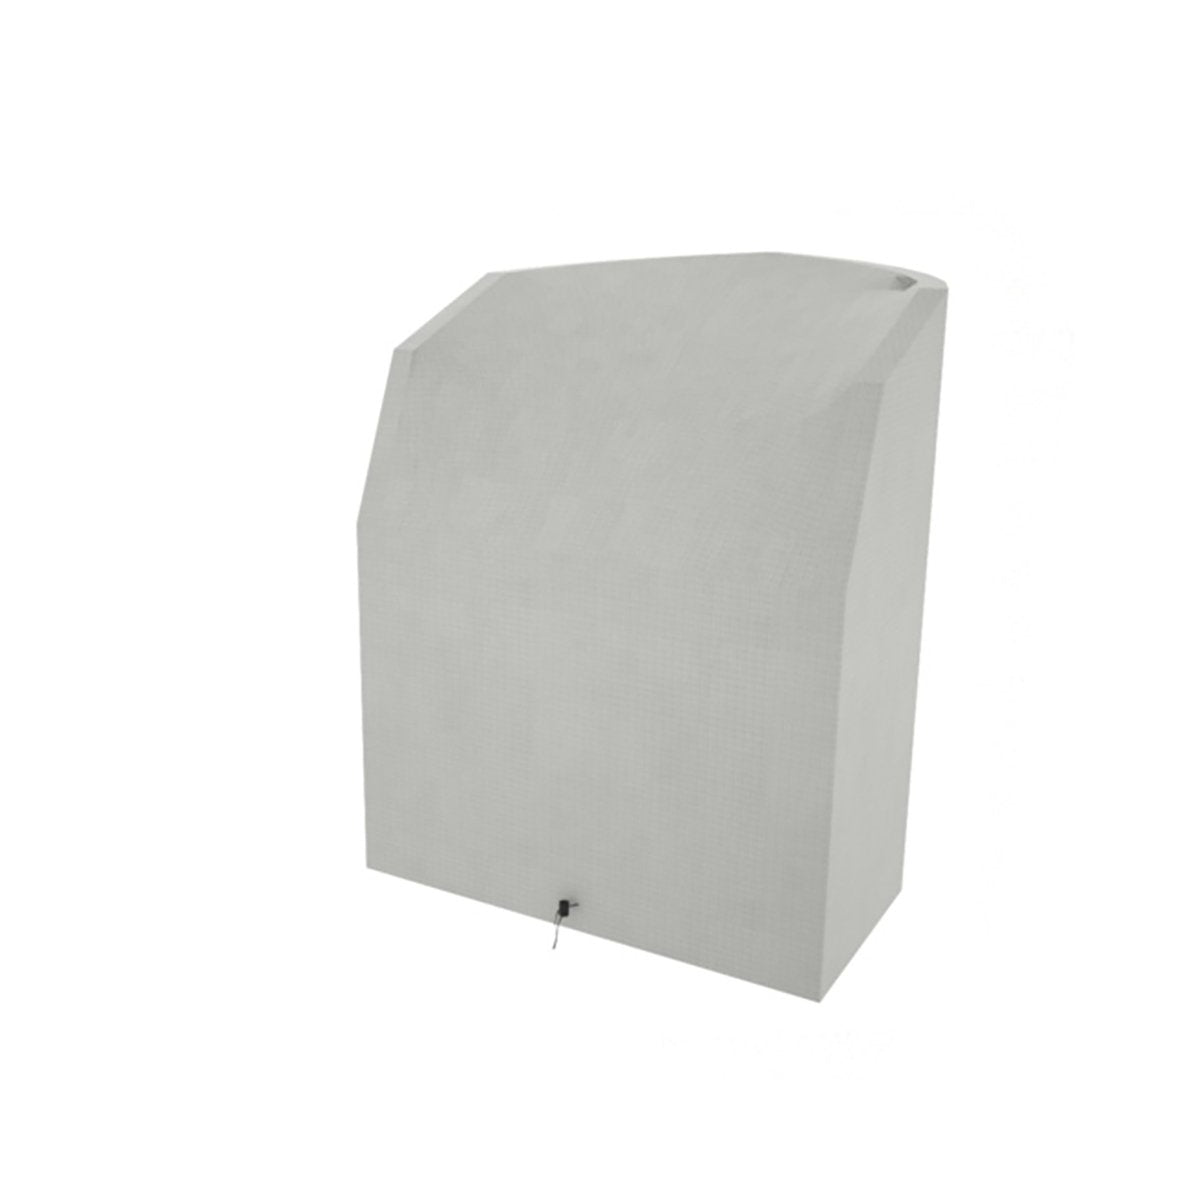 Pelham Chair Protective Cover